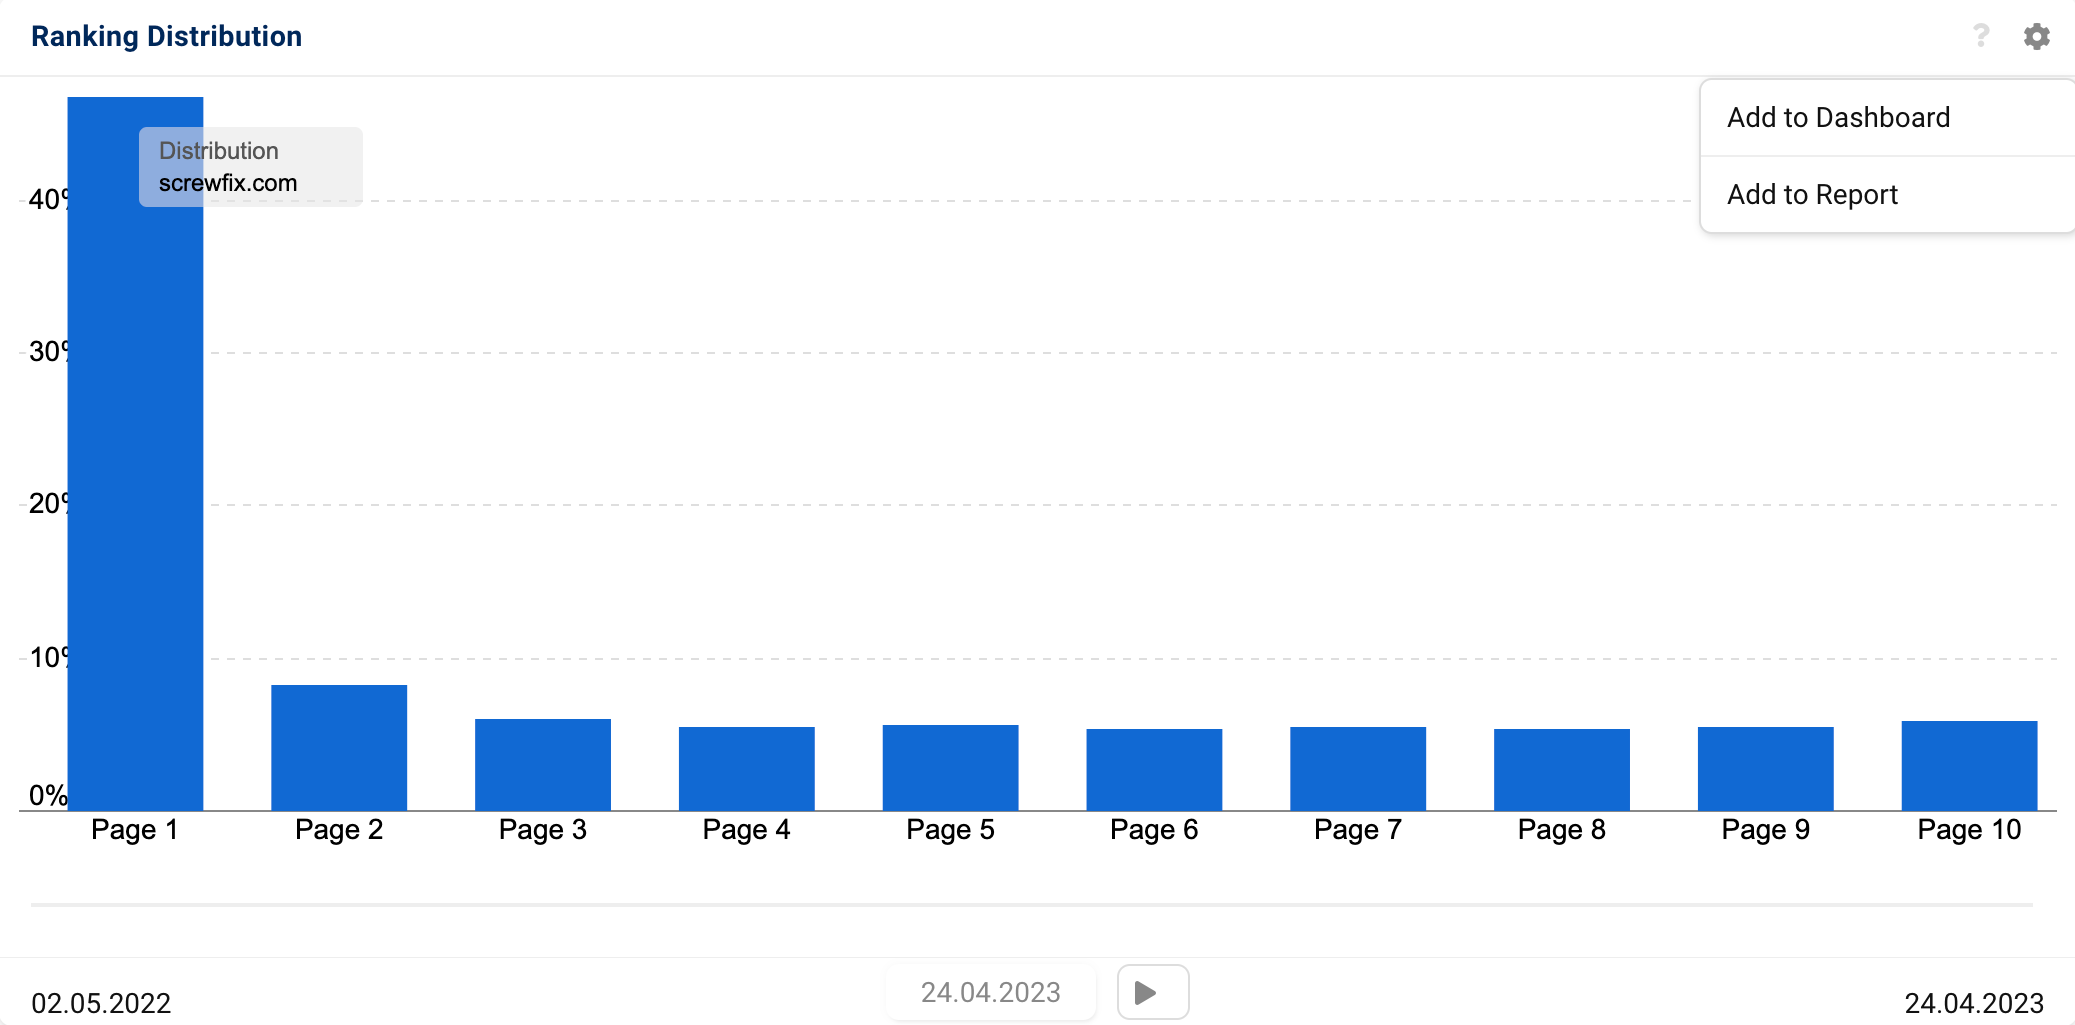 The ranking distribution of the domain screwfix.com in a bar chart. At the top right, there is a small cogwheel that can be used to access the buttons #Add to Dashboard and #Add to Report.